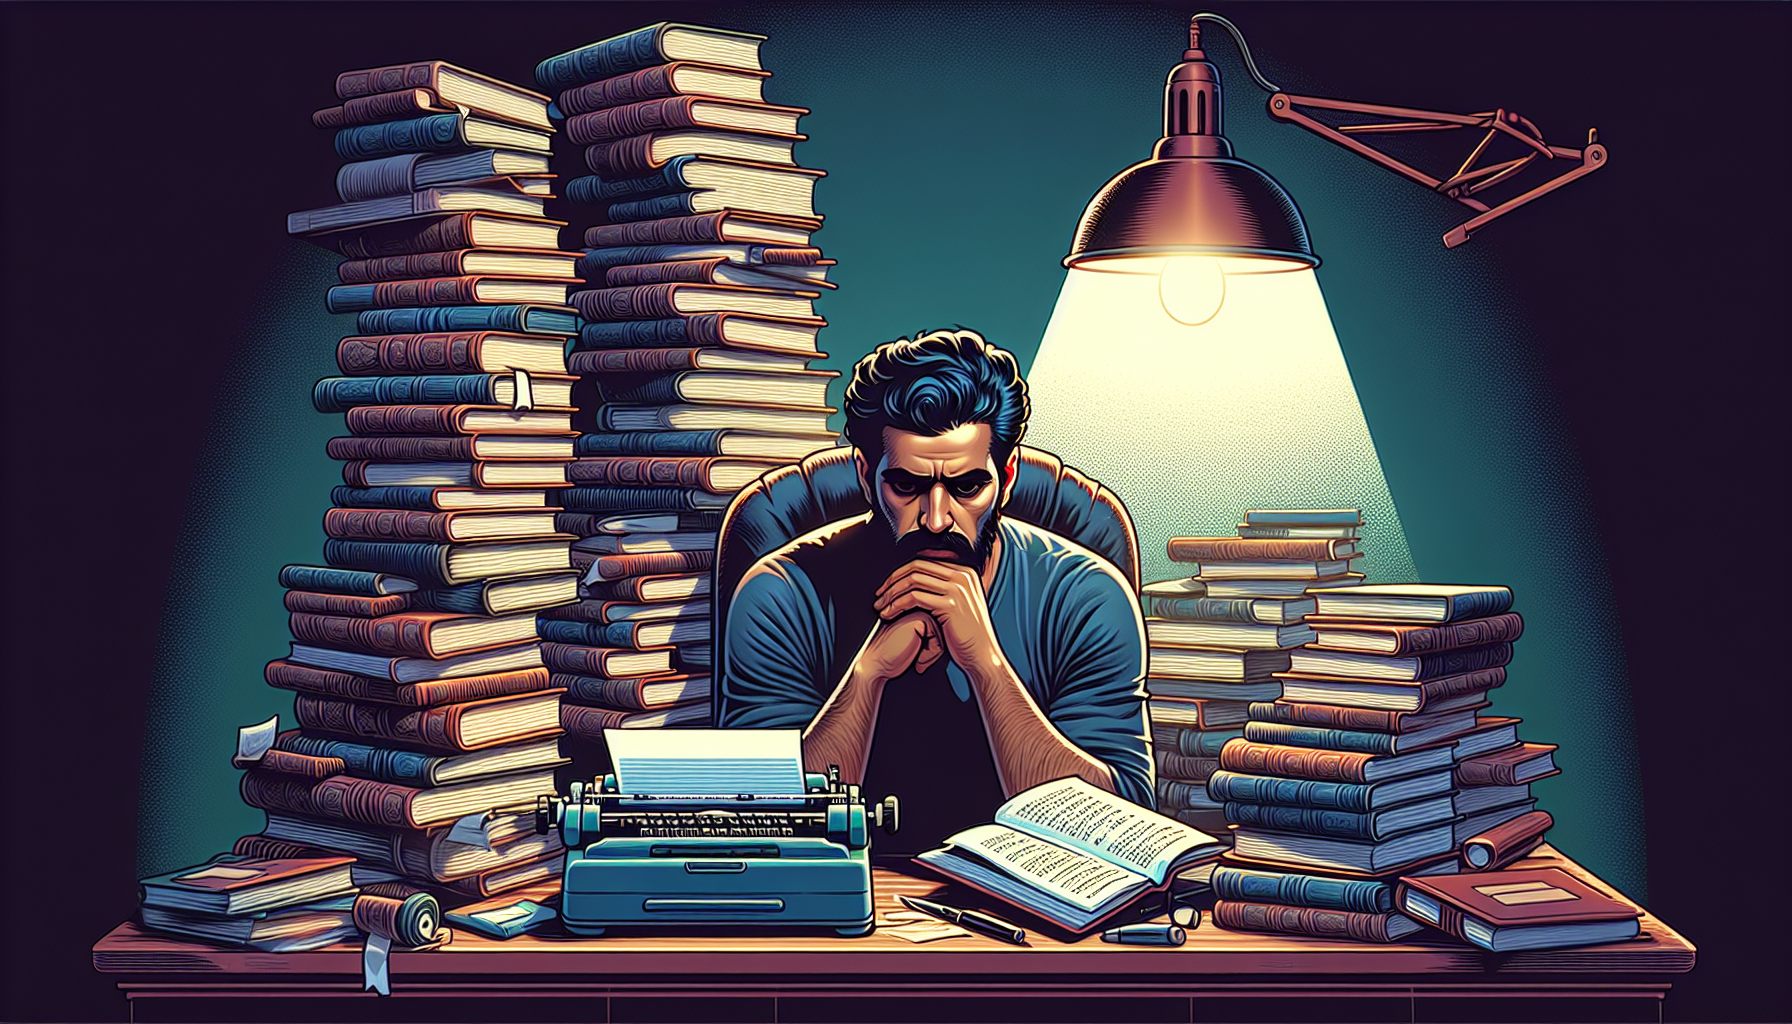 An image of a pensive writer sitting at a cluttered desk under a dim lamp, surrounded by stacks of books and screenplay drafts, with a vintage typewriter and a glowing computer screen displaying a lis